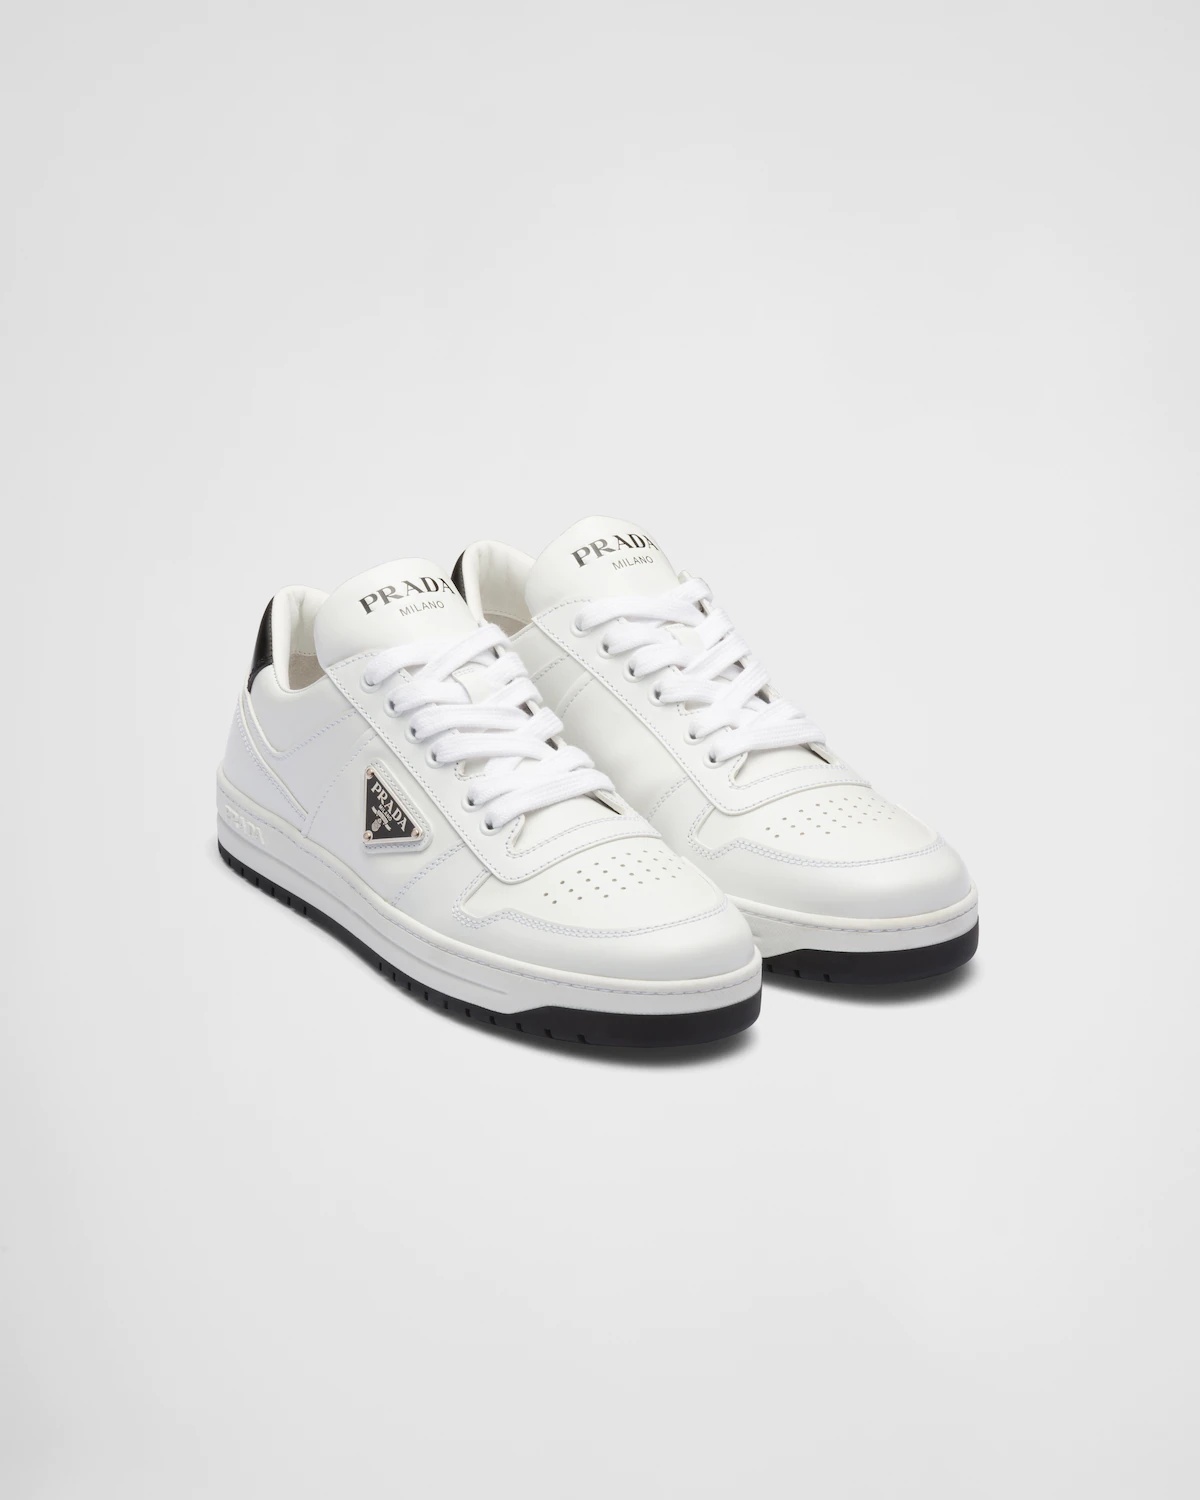 Downtown perforated leather sneakers - 2